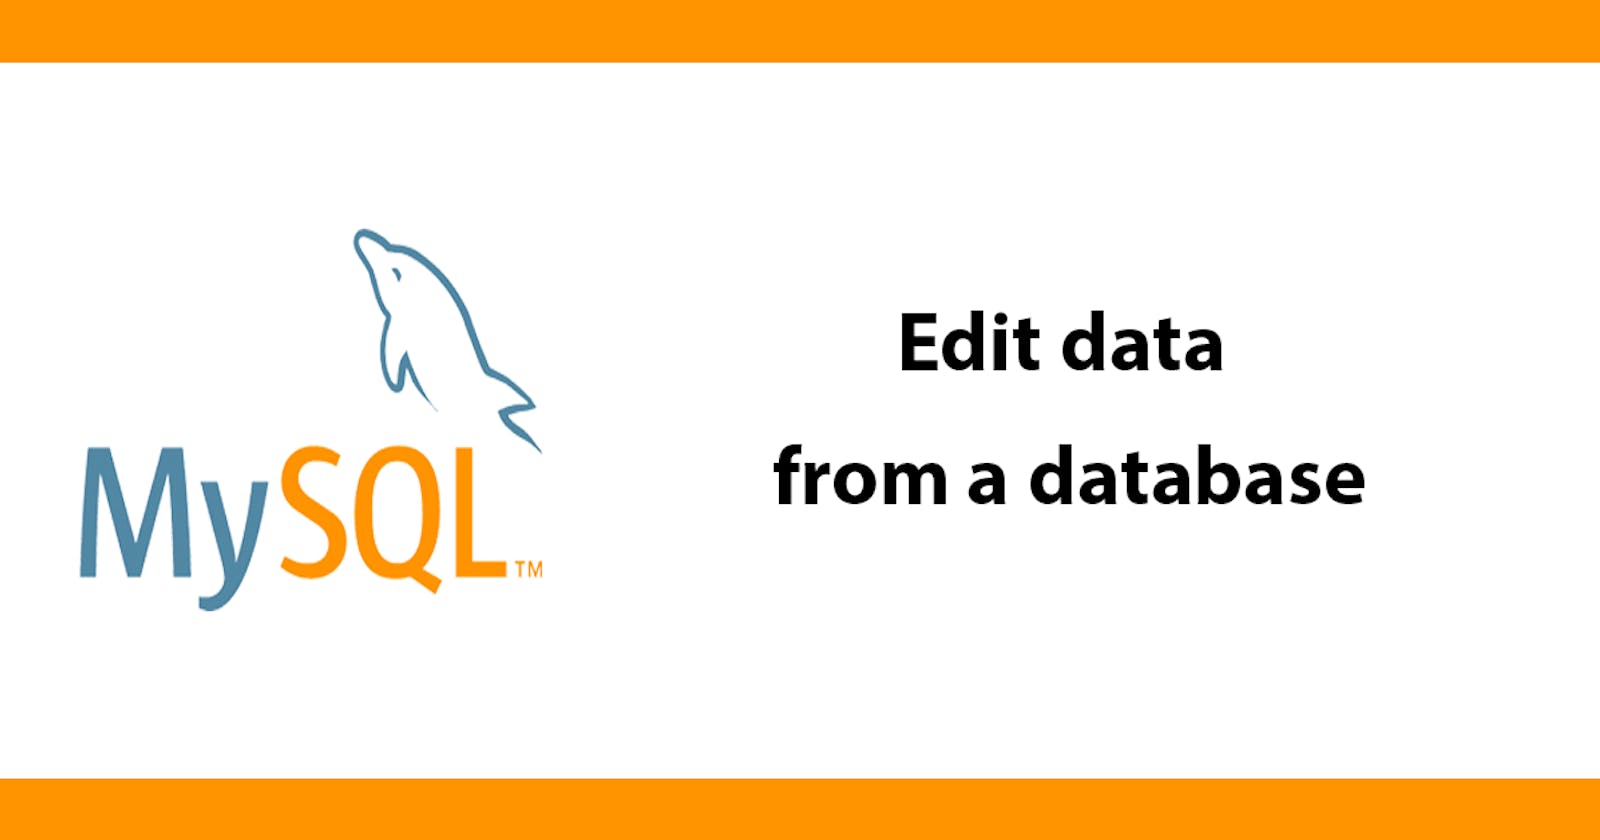 Edit data from a database